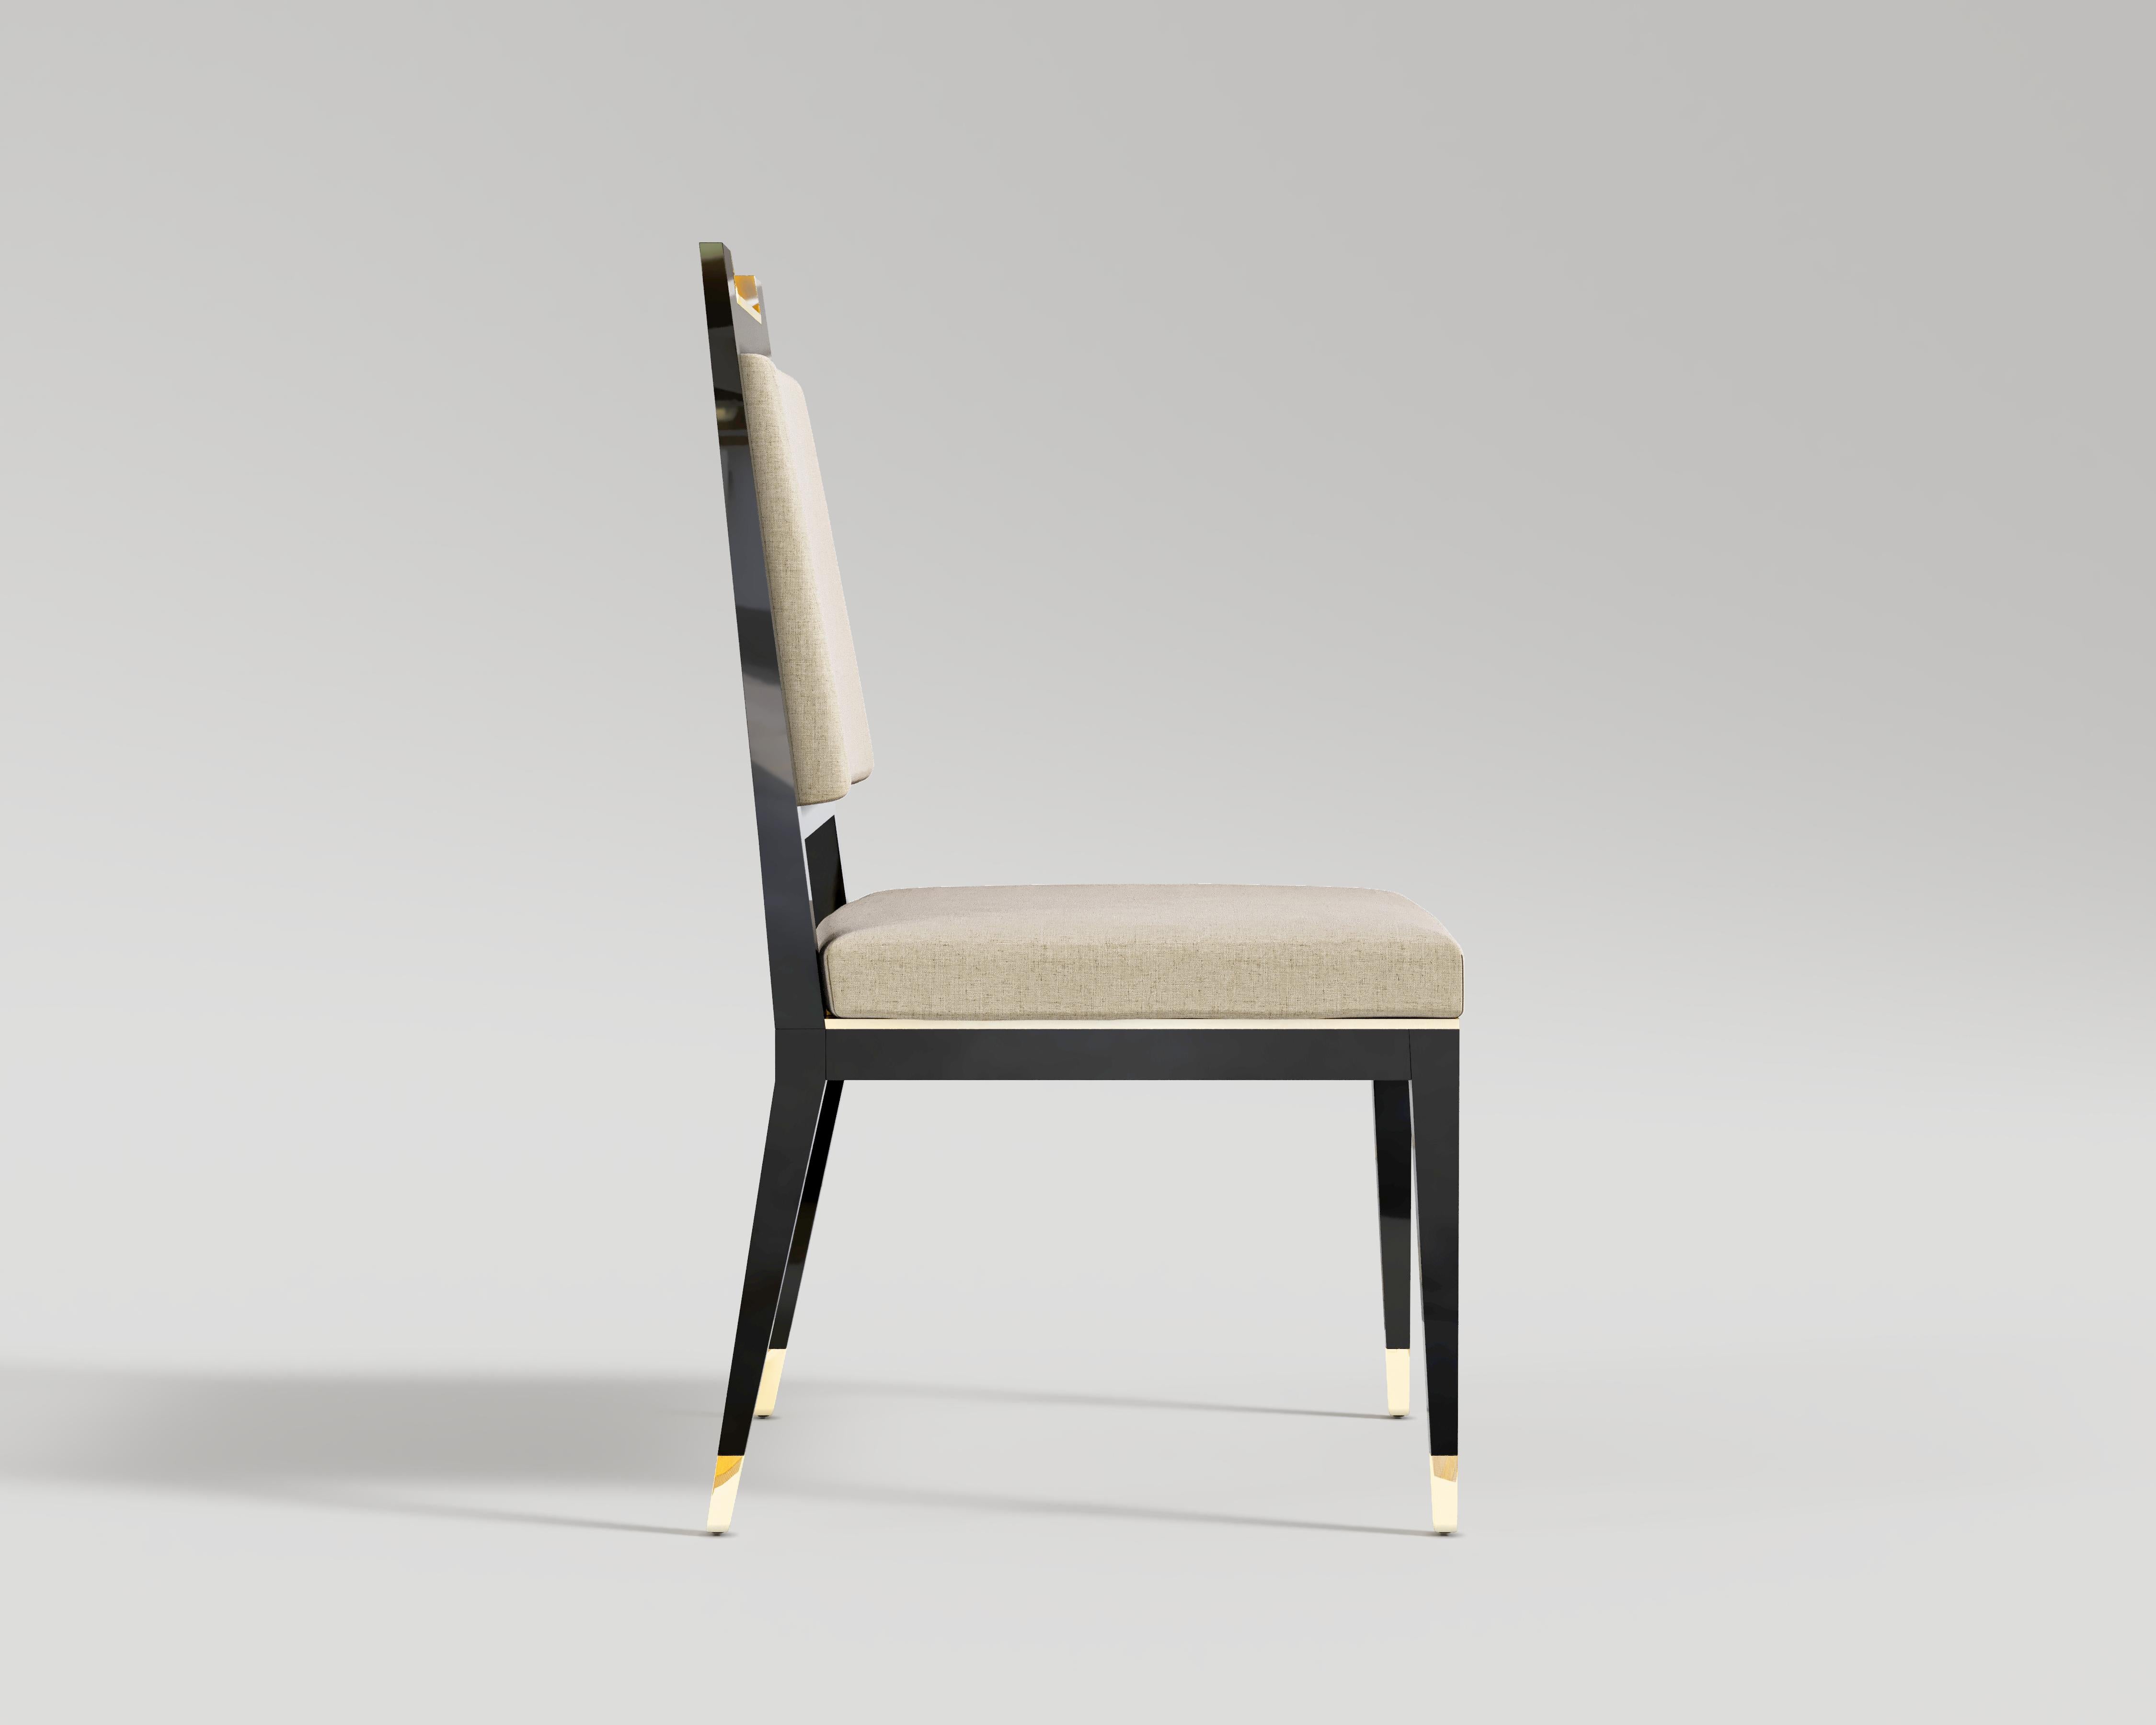 Palena Chair
The Palena Dining Chair is a great example of luxury and ease. This chair is a paean to the Art Deco period, designed to introduce sophistication into any dining room.

The frame is made of black-lacquered metal, very firm and shining